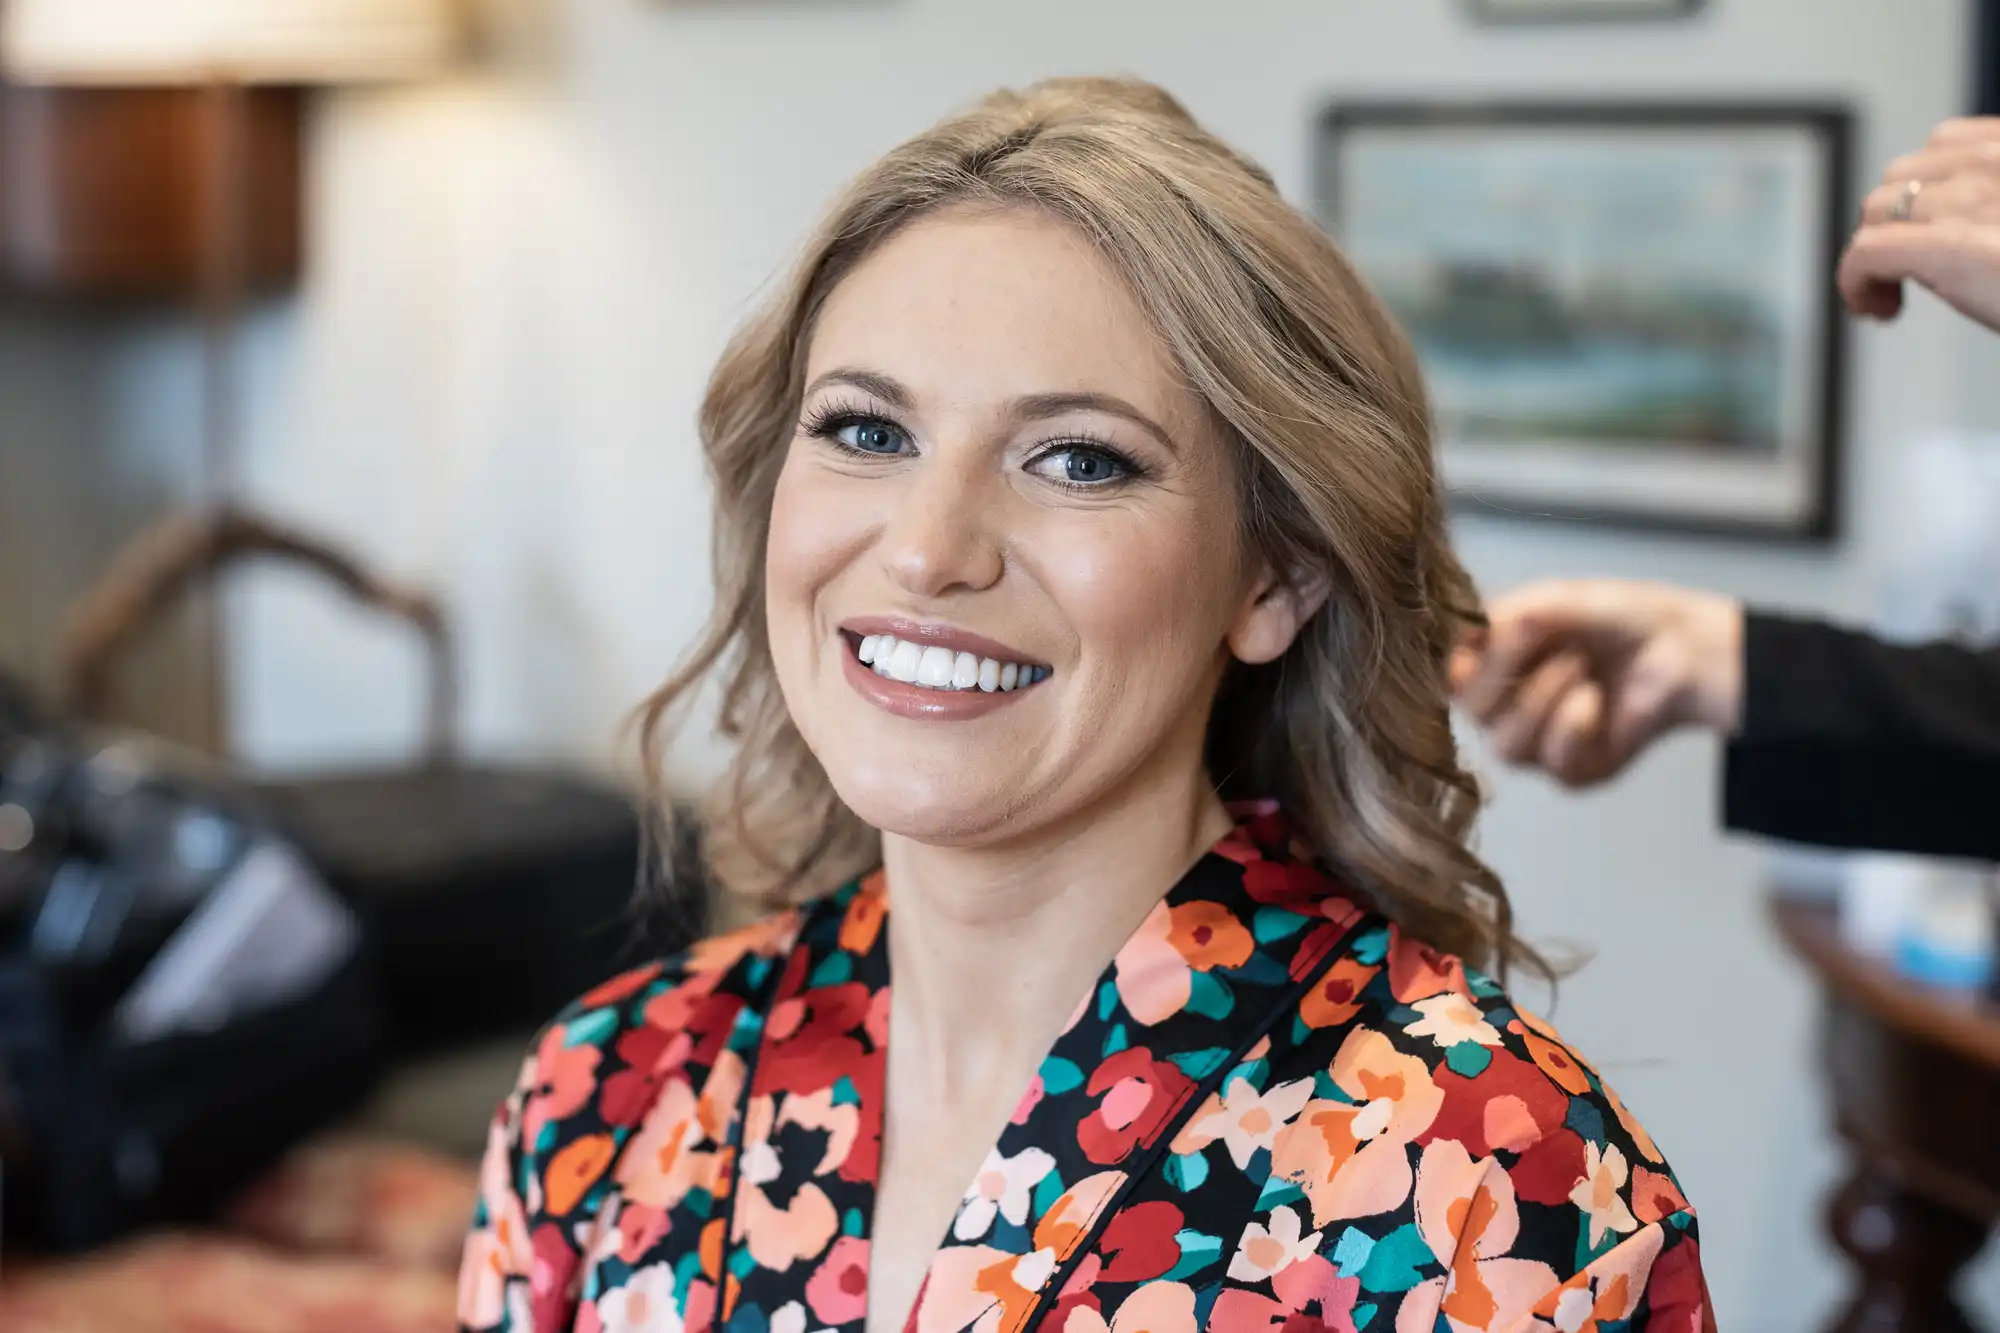 A smiling woman with blonde hair wearing a floral blouse gets her hair styled by a person in the background.